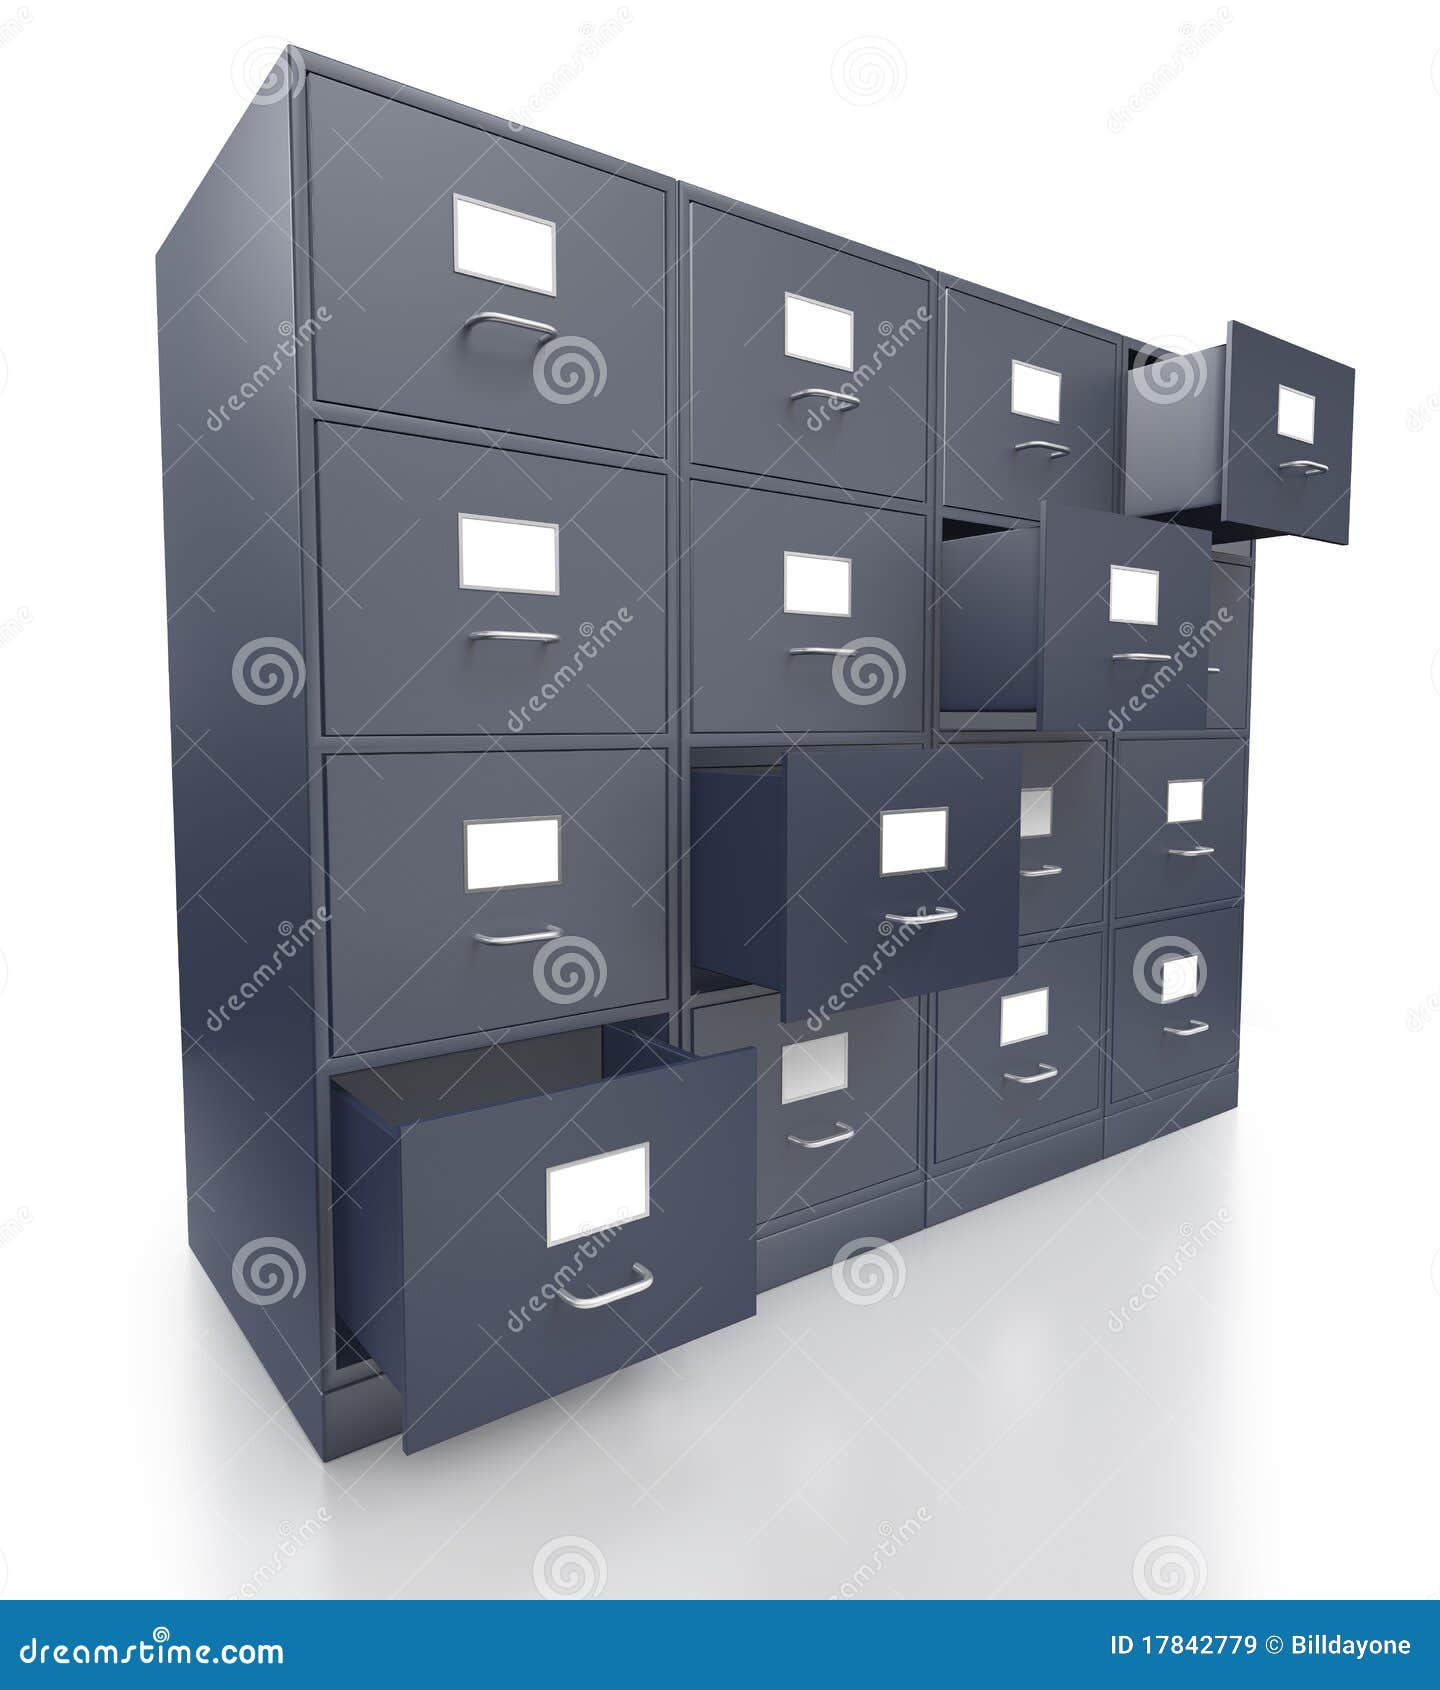 Four Grey Office Filing Cabinets With Open Drawers Stock